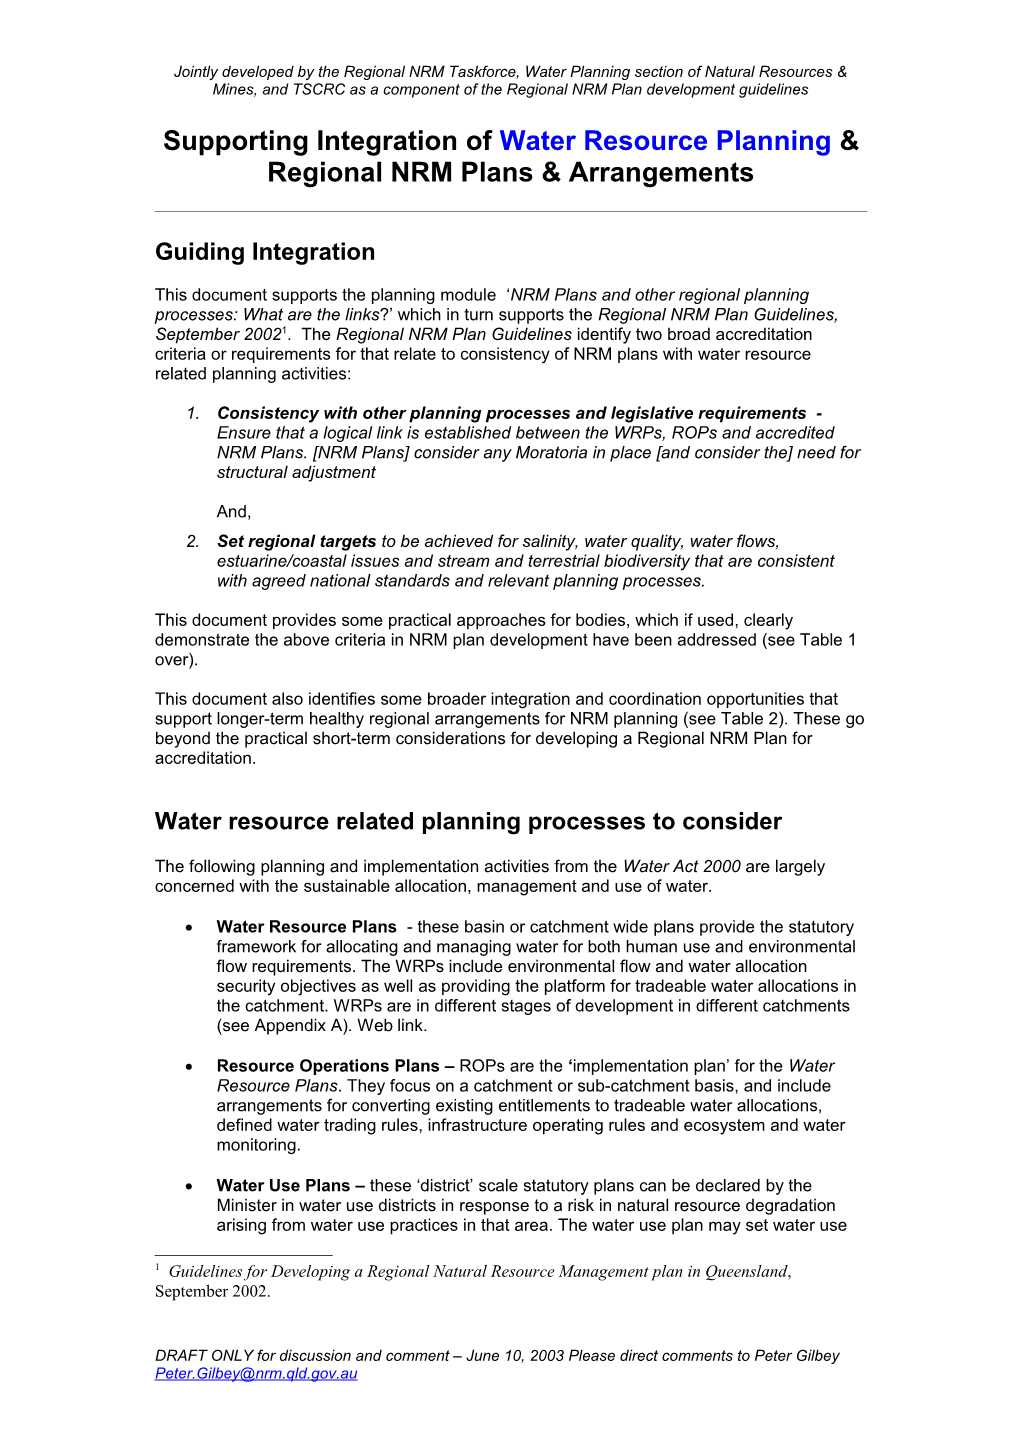 Integrating Planning Requirements of the Water Act 2000 Into Regional Natural Resource